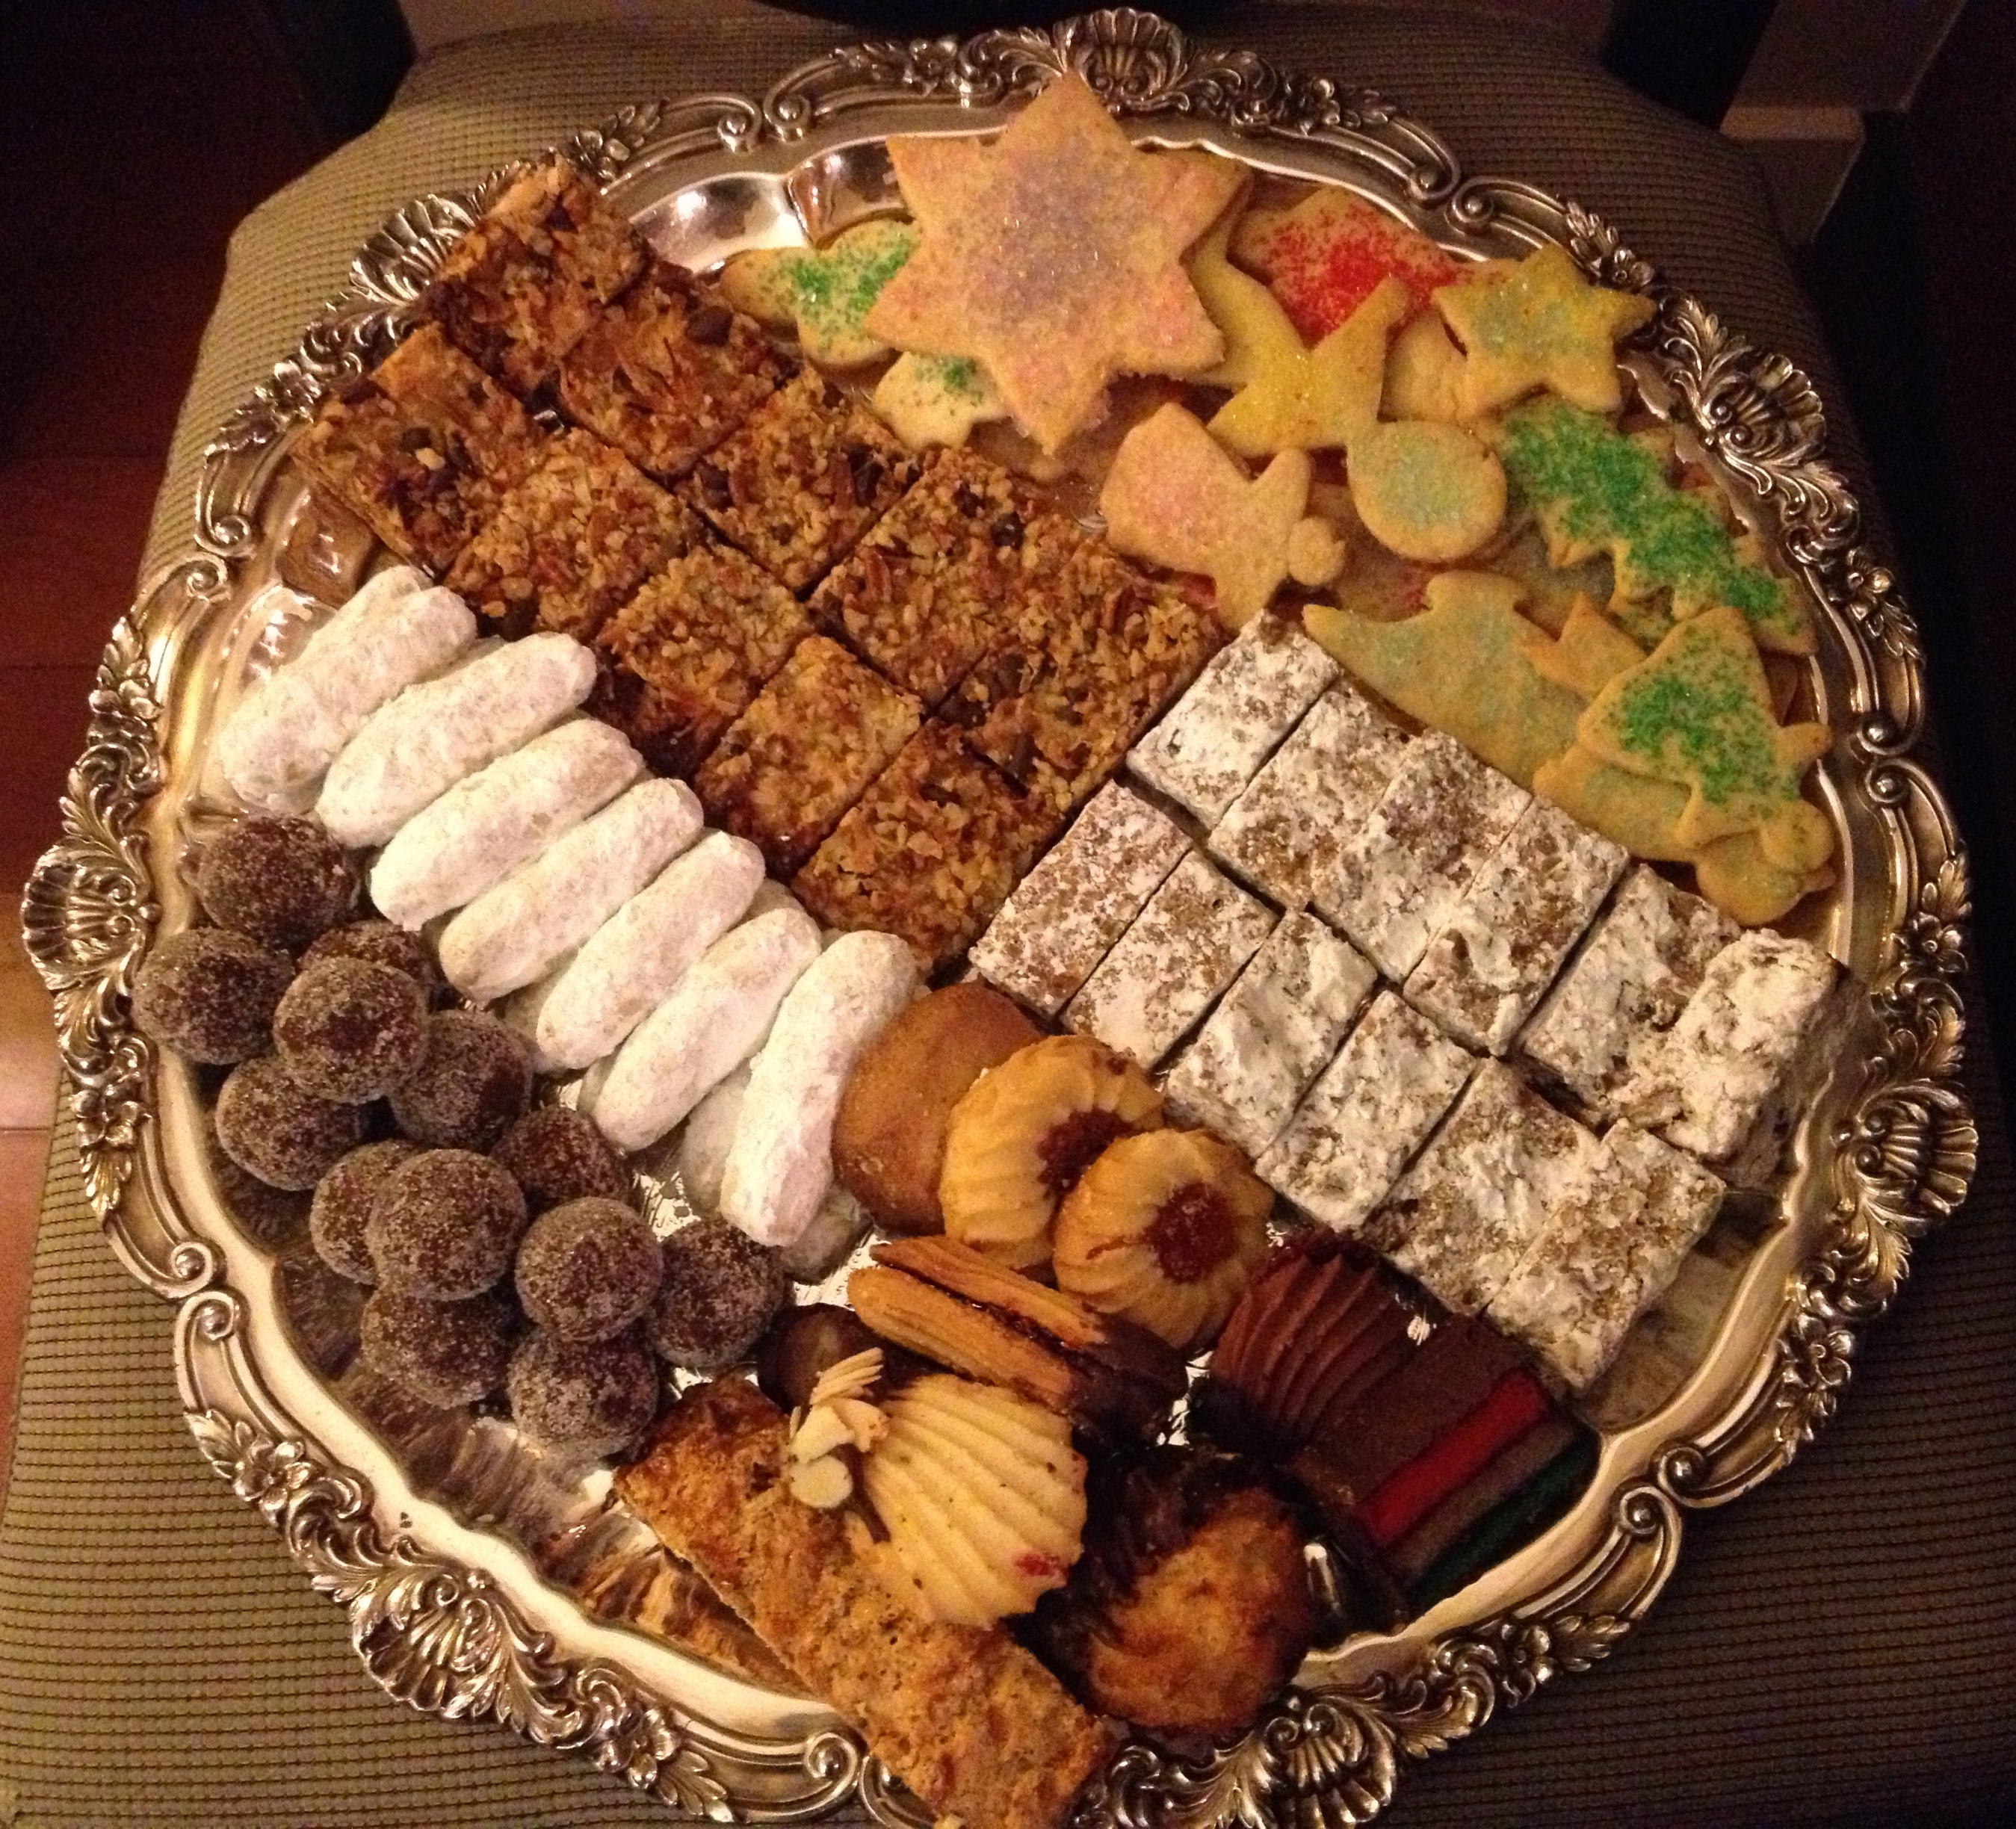 Christmas/holiday cookie platter with Cognac sugarplums, hello Dolly Squares, date bars, sugar cookies, pecan crisps, and special bakery cookies